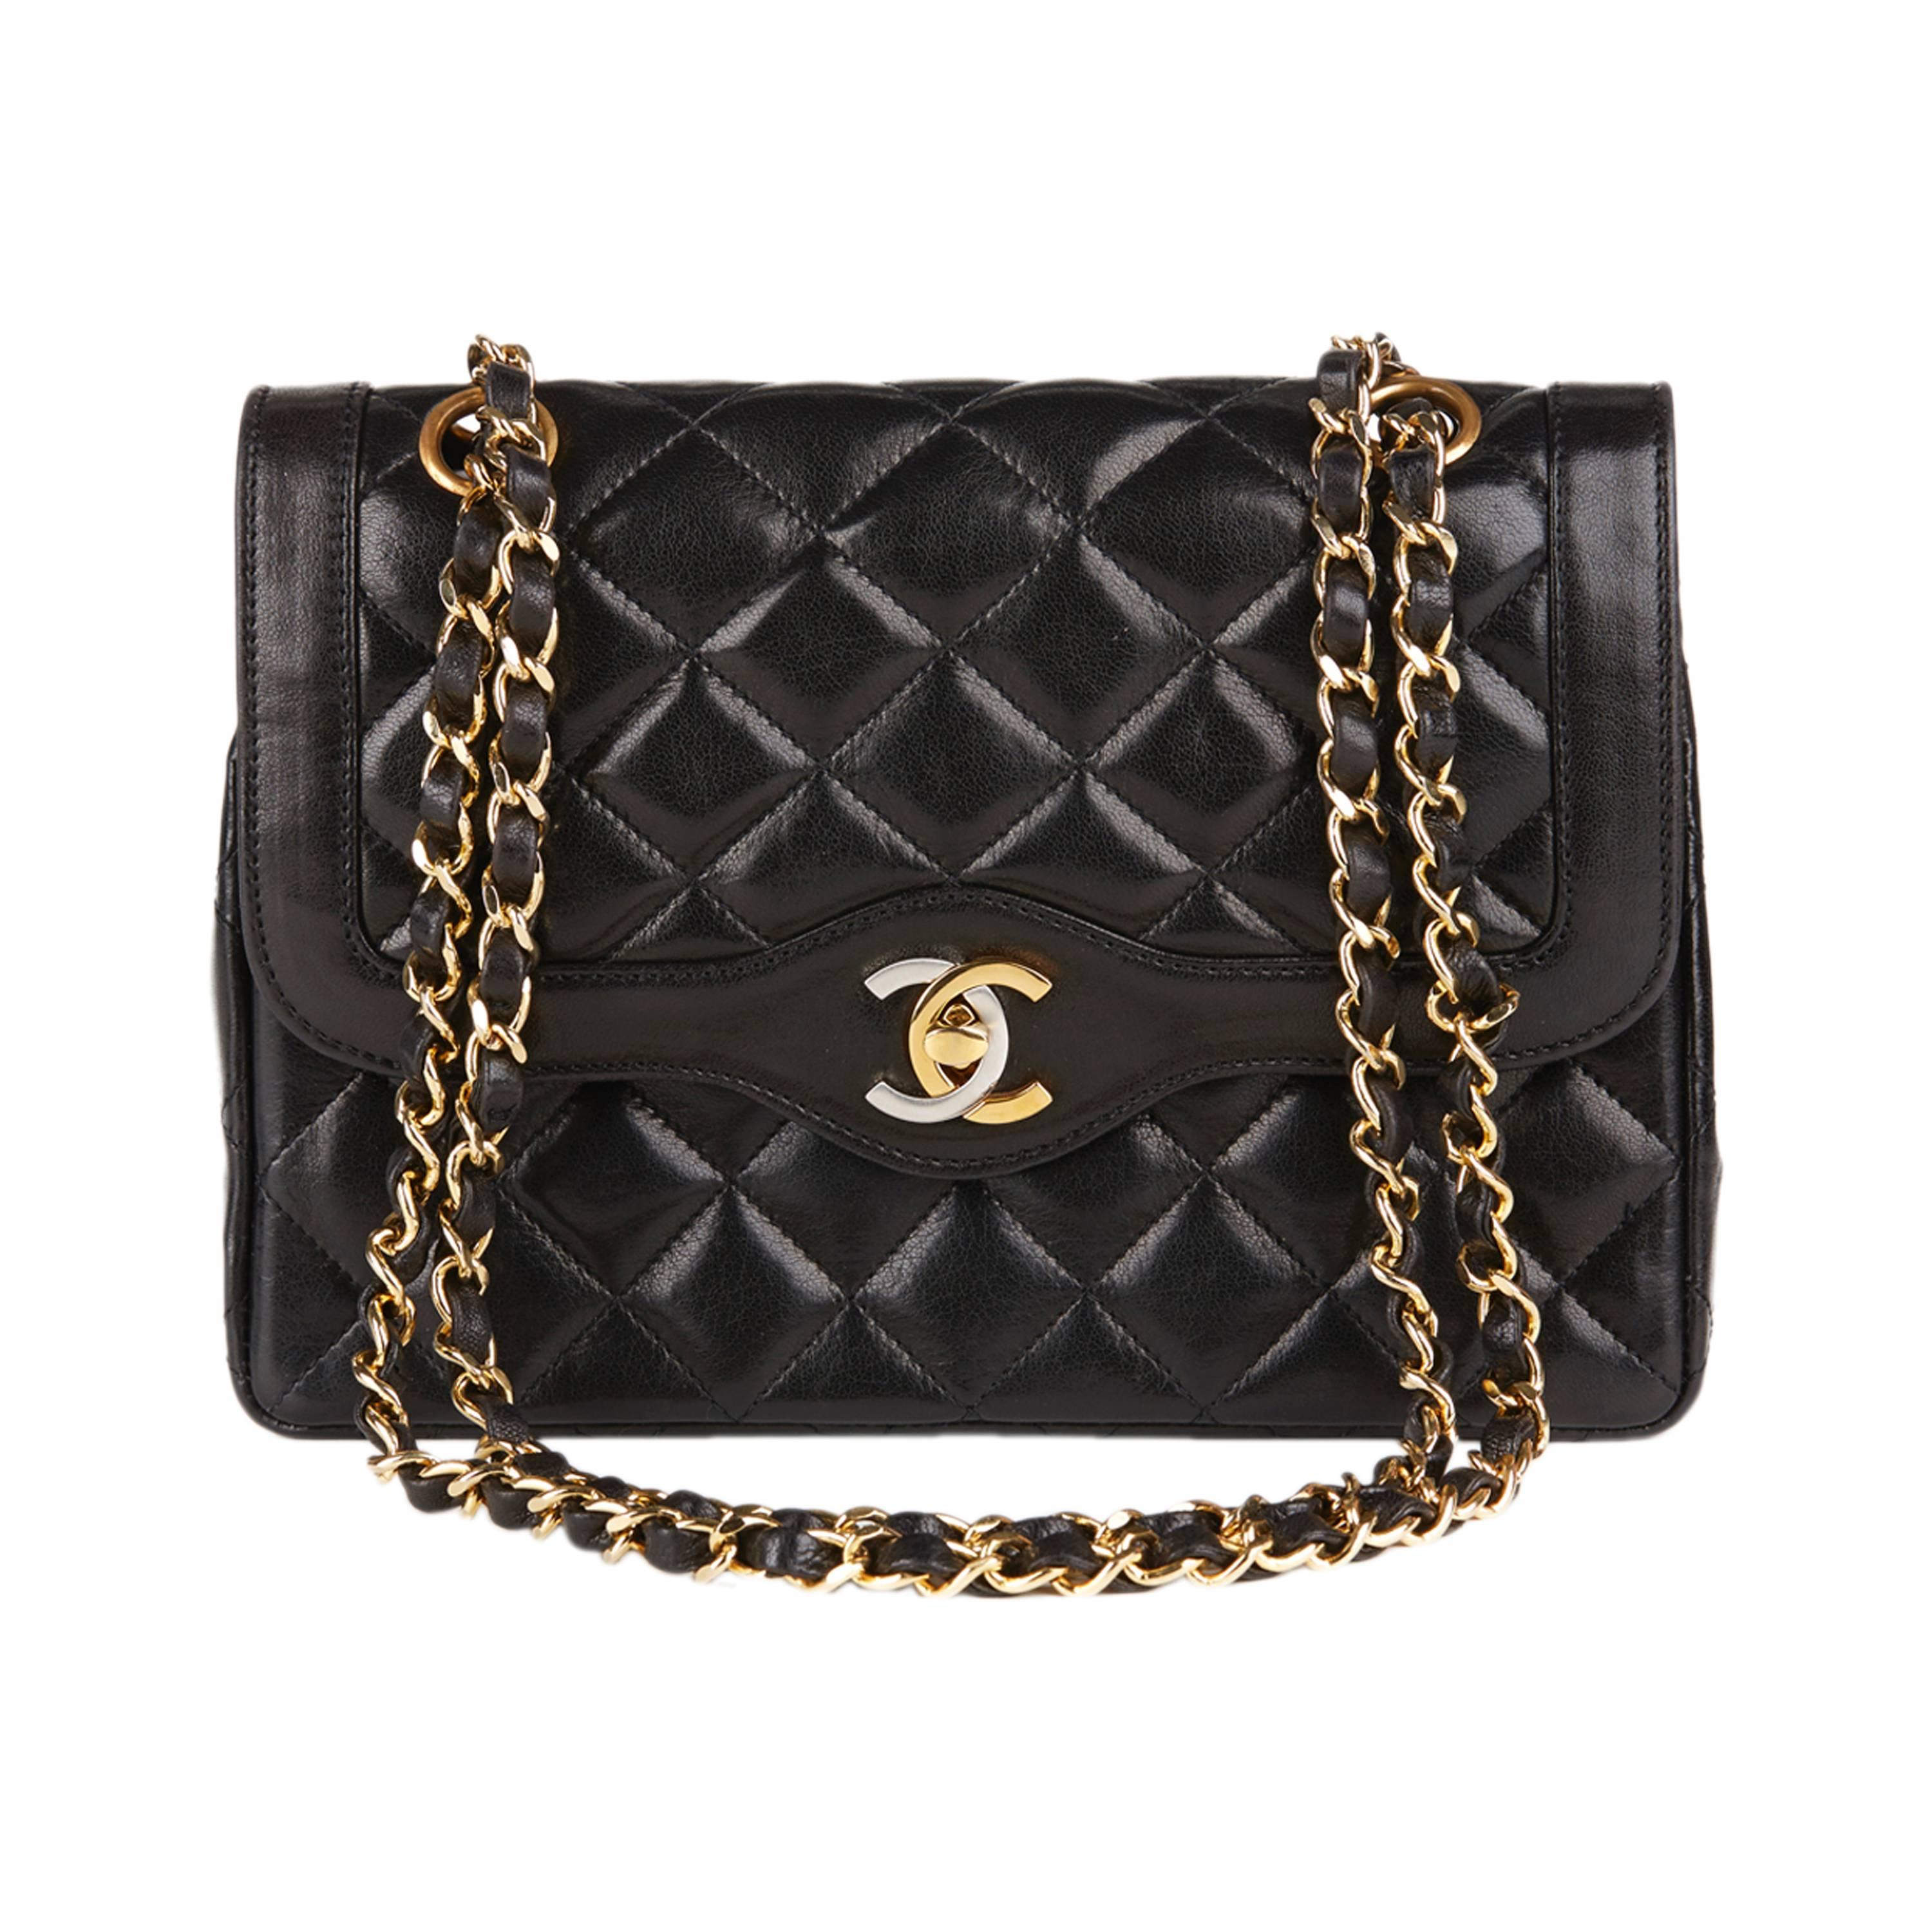 1990s Chanel Black Quilted Lambskin Limited Edition Vintage Single Flap Bag